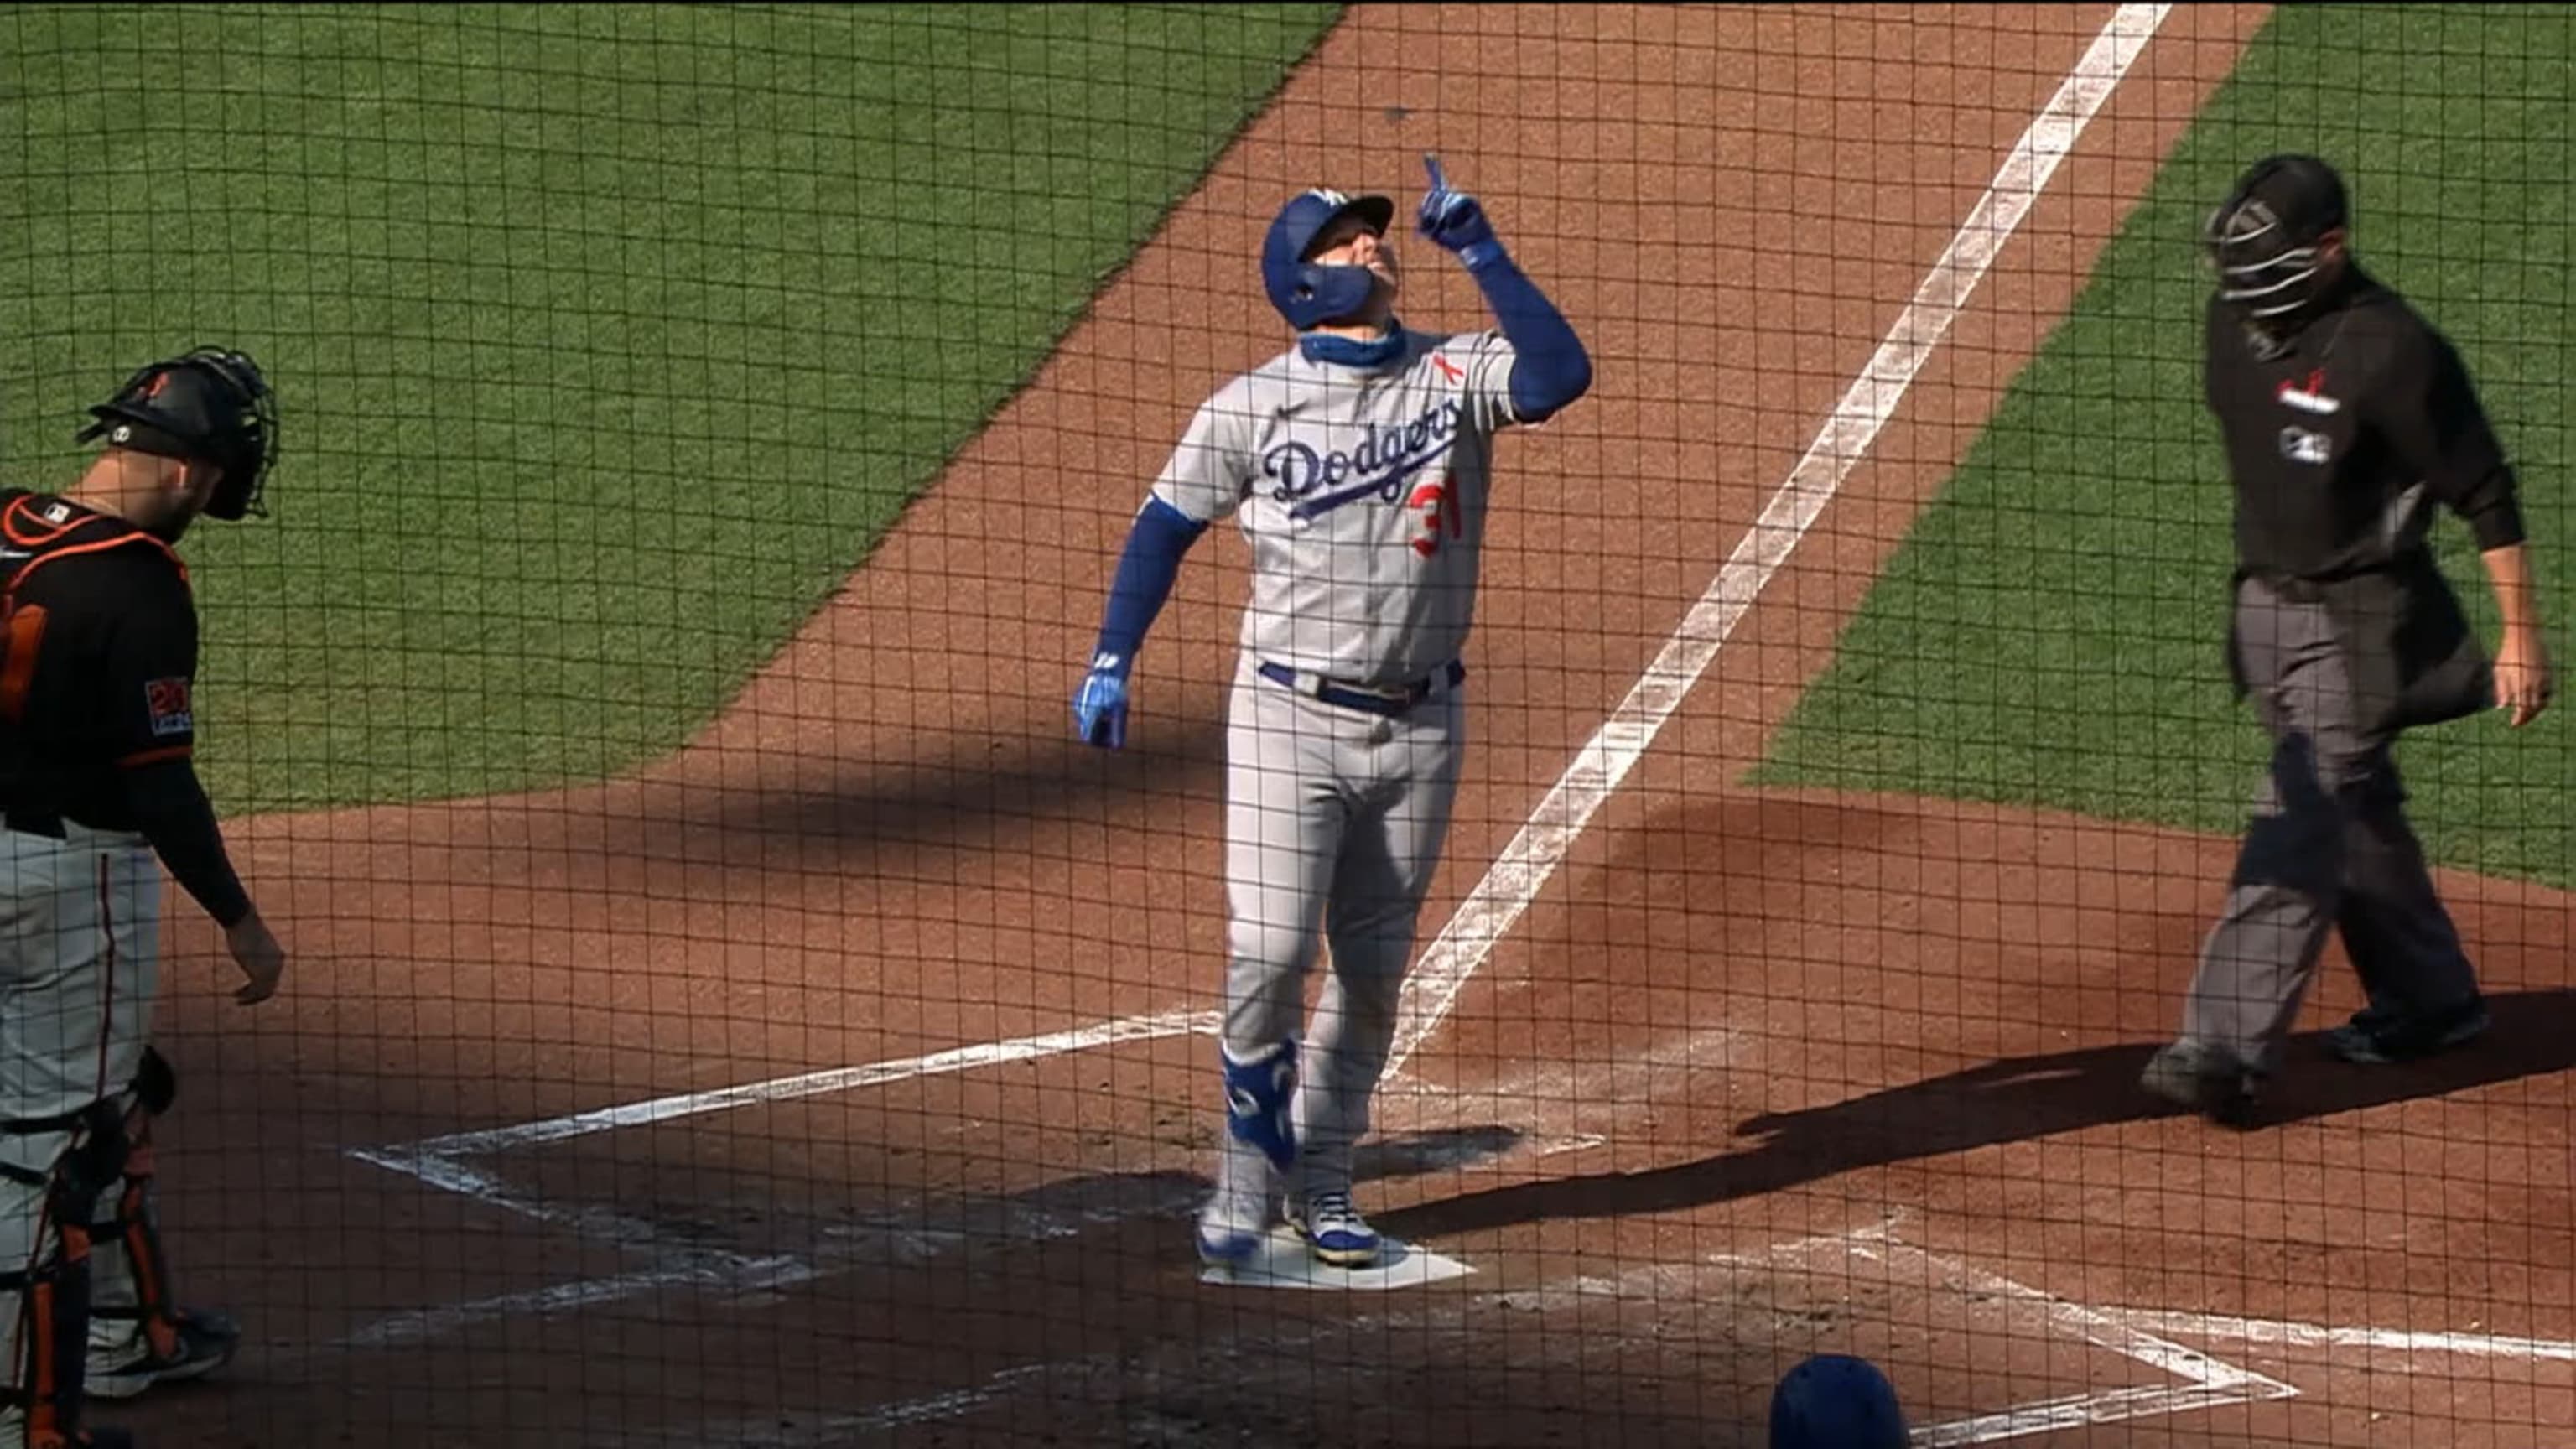 Dodgers shut out Giants in doubleheader sweep